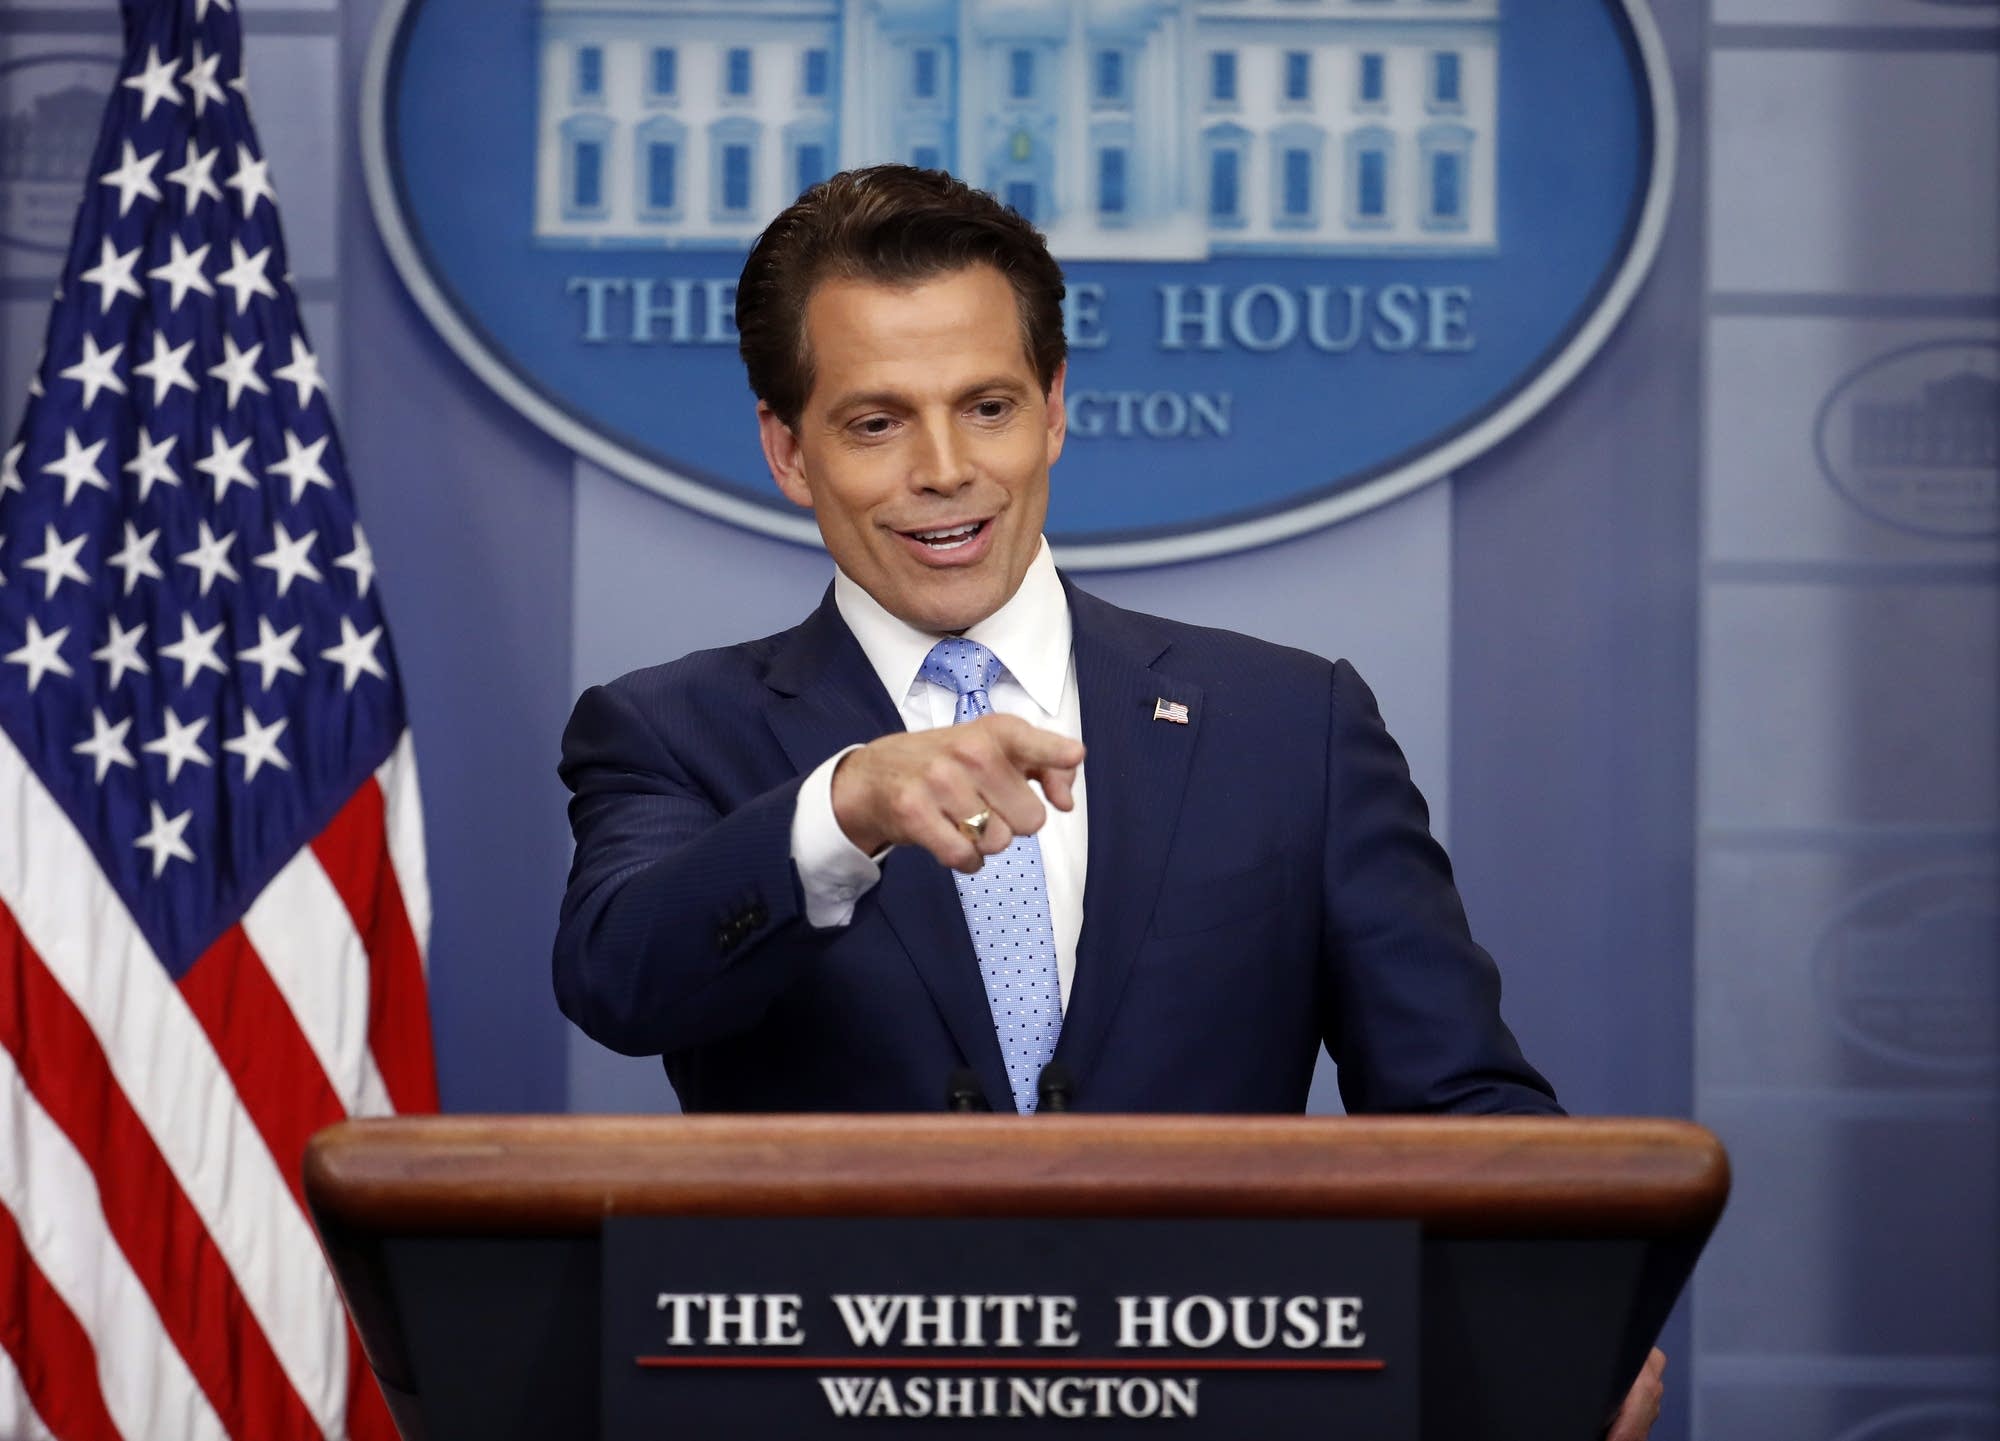 Trump Ousts Scaramucci in Latest White House Shakeup